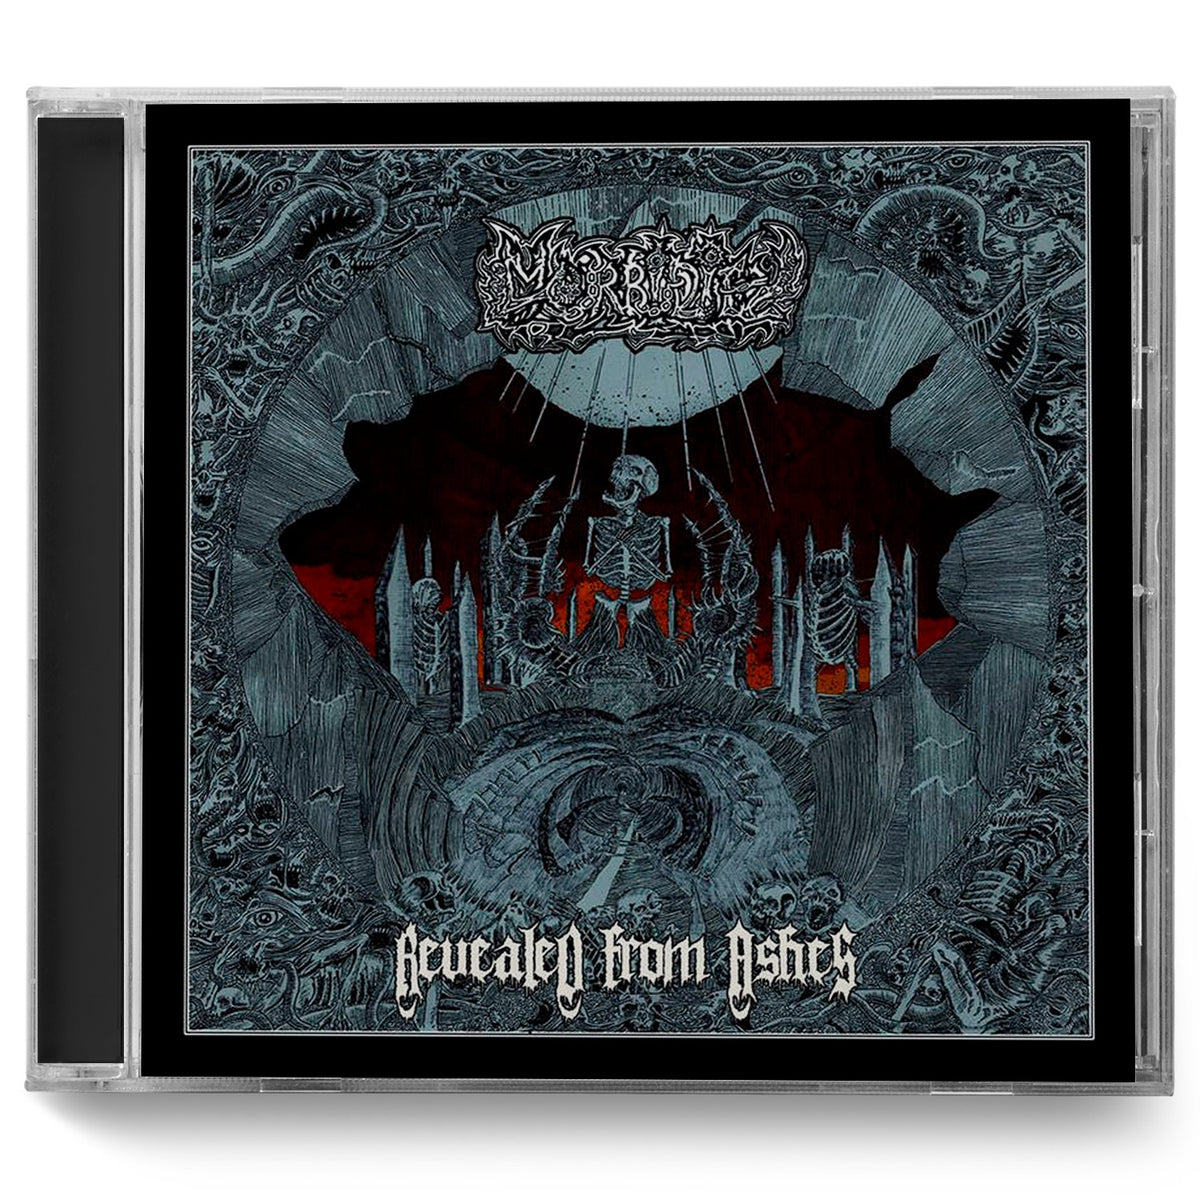 Morbidity "Revealed from Ashes" CD